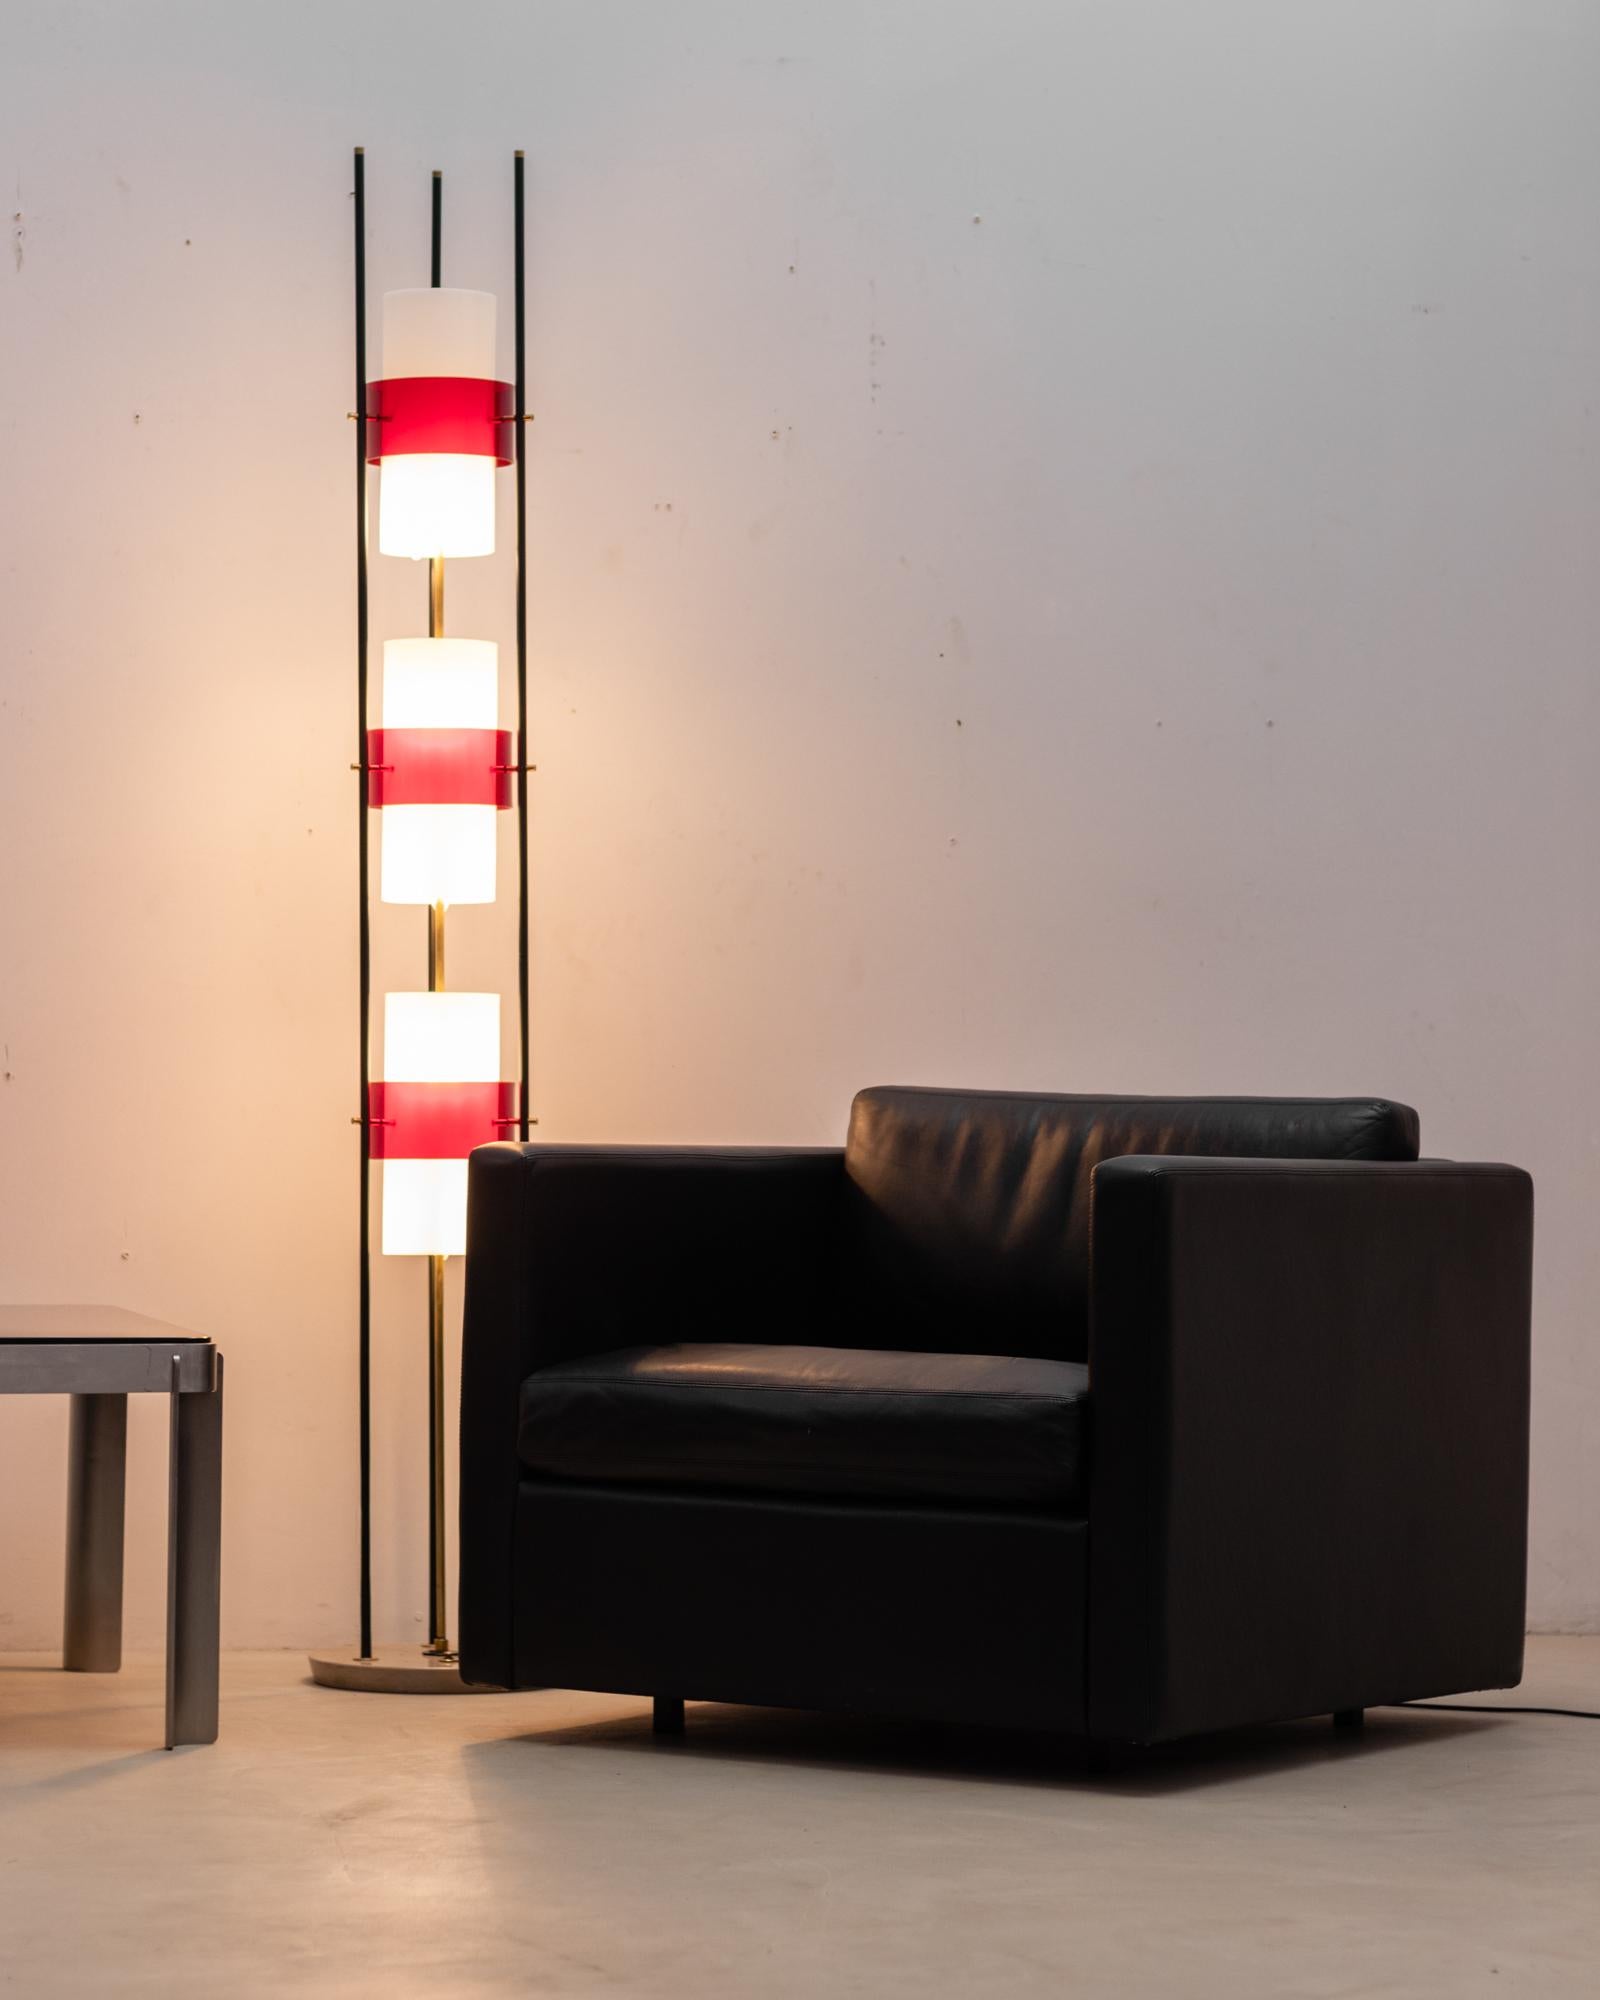 Transport yourself to the 1950s with this Italian floor lamp crafted by Stilnovo.  This lamp stands on a sturdy marble base, supporting three sleek, black painted uprights. These uprights act as the structural foundation for the lampshades, which